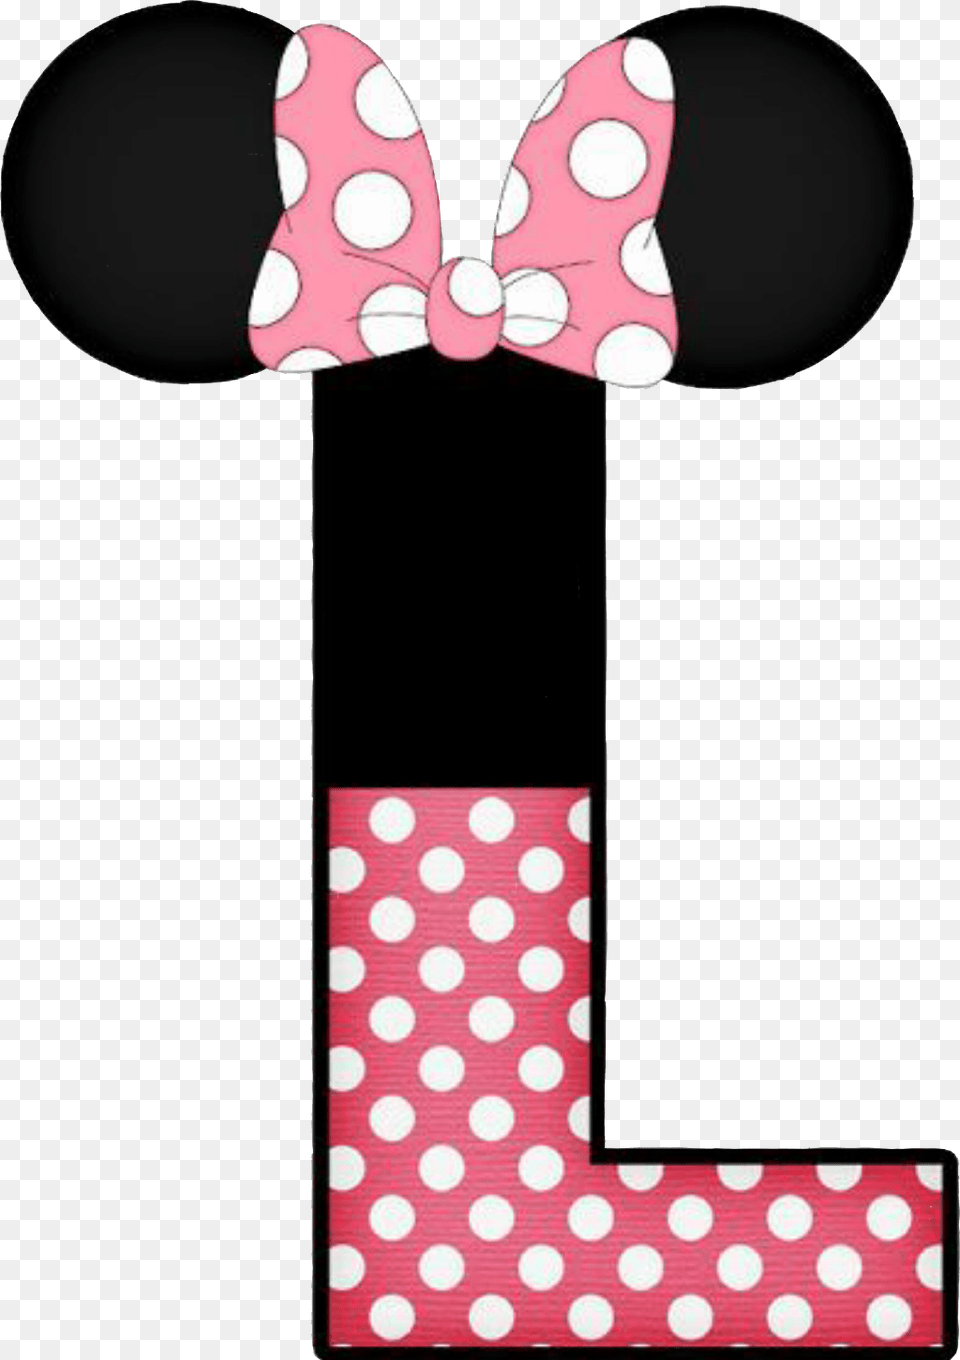 Minniemouse Letters E In Minnie Mouse Letters, Accessories, Formal Wear, Pattern, Tie Png